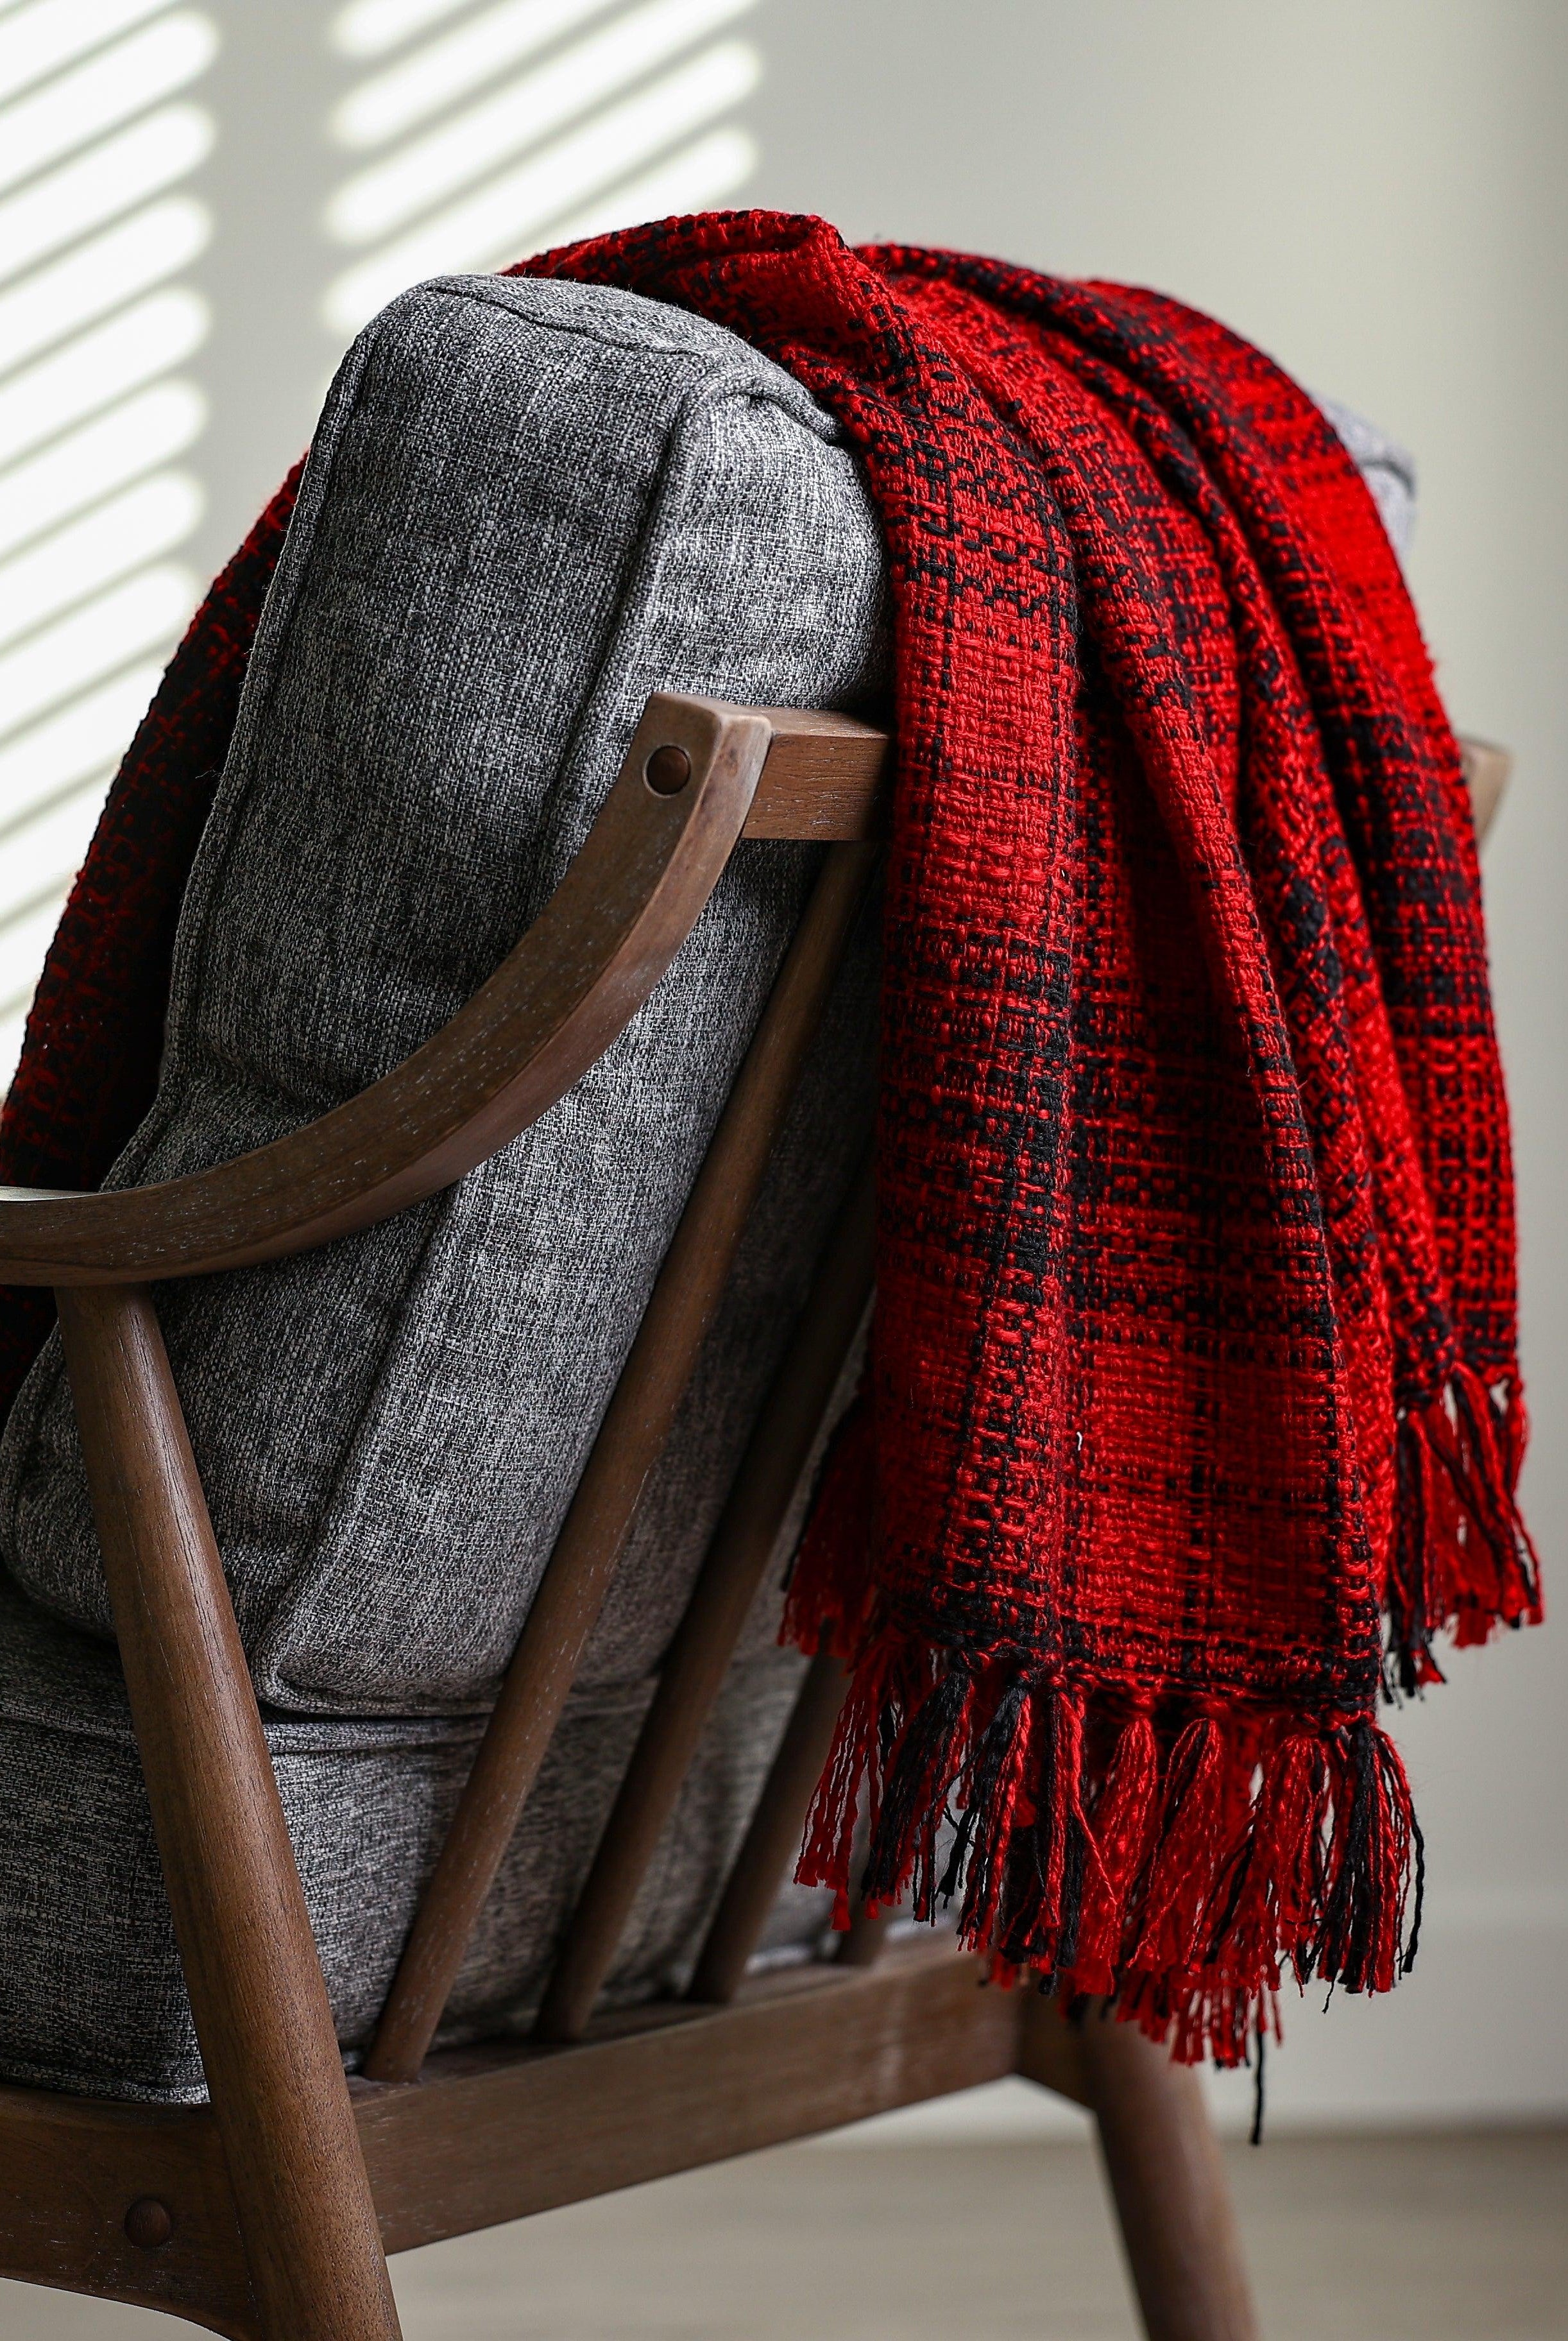 bland and red plaid throw blanket